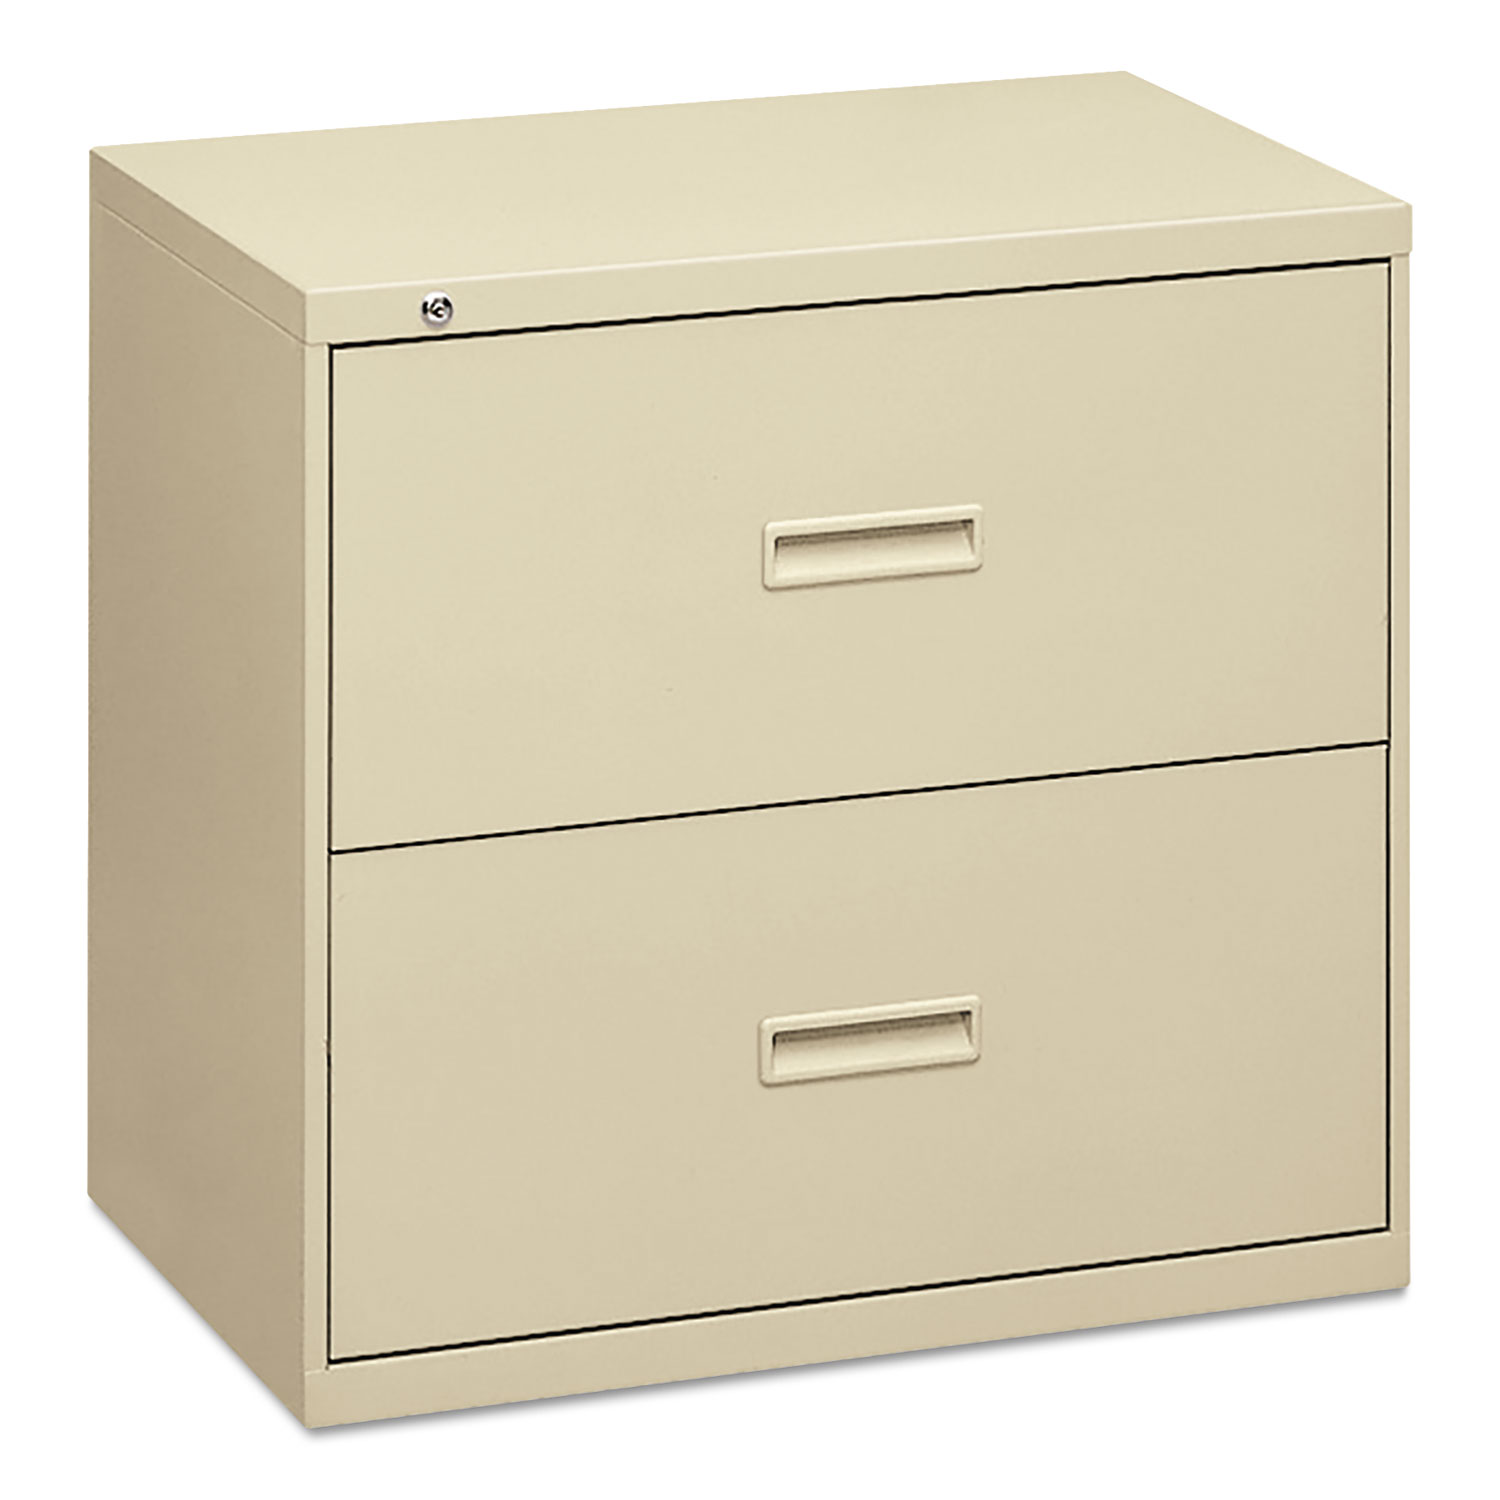  HON H482.L.L 400 Series Two-Drawer Lateral File, 36w x 18d x 28h, Putty (BSX482LL) 